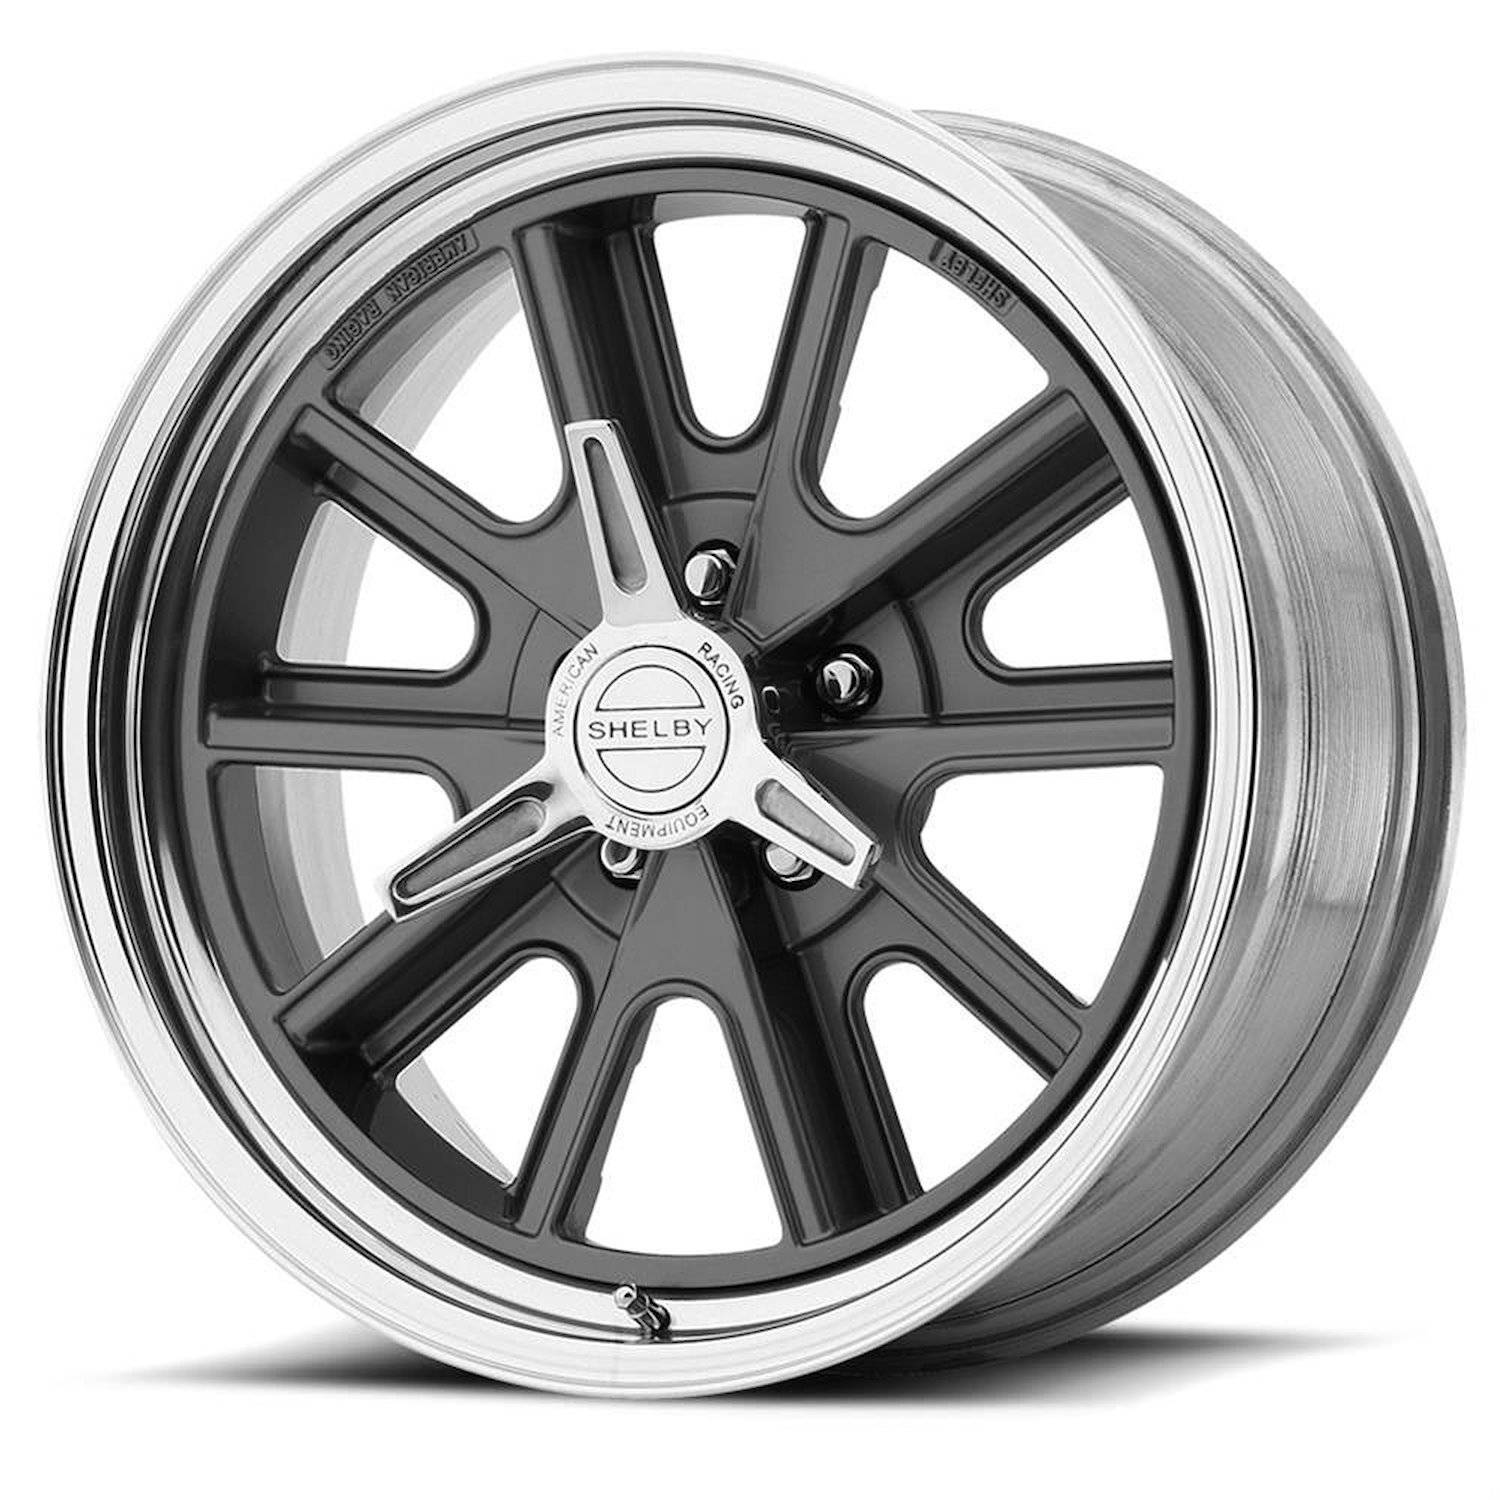 AMERICAN RACING 427 SHELBY COBRA TWO-PIECE MAG GRAY CENTER POLISHED BARREL 18 x 8 5x4.5 0 4.50